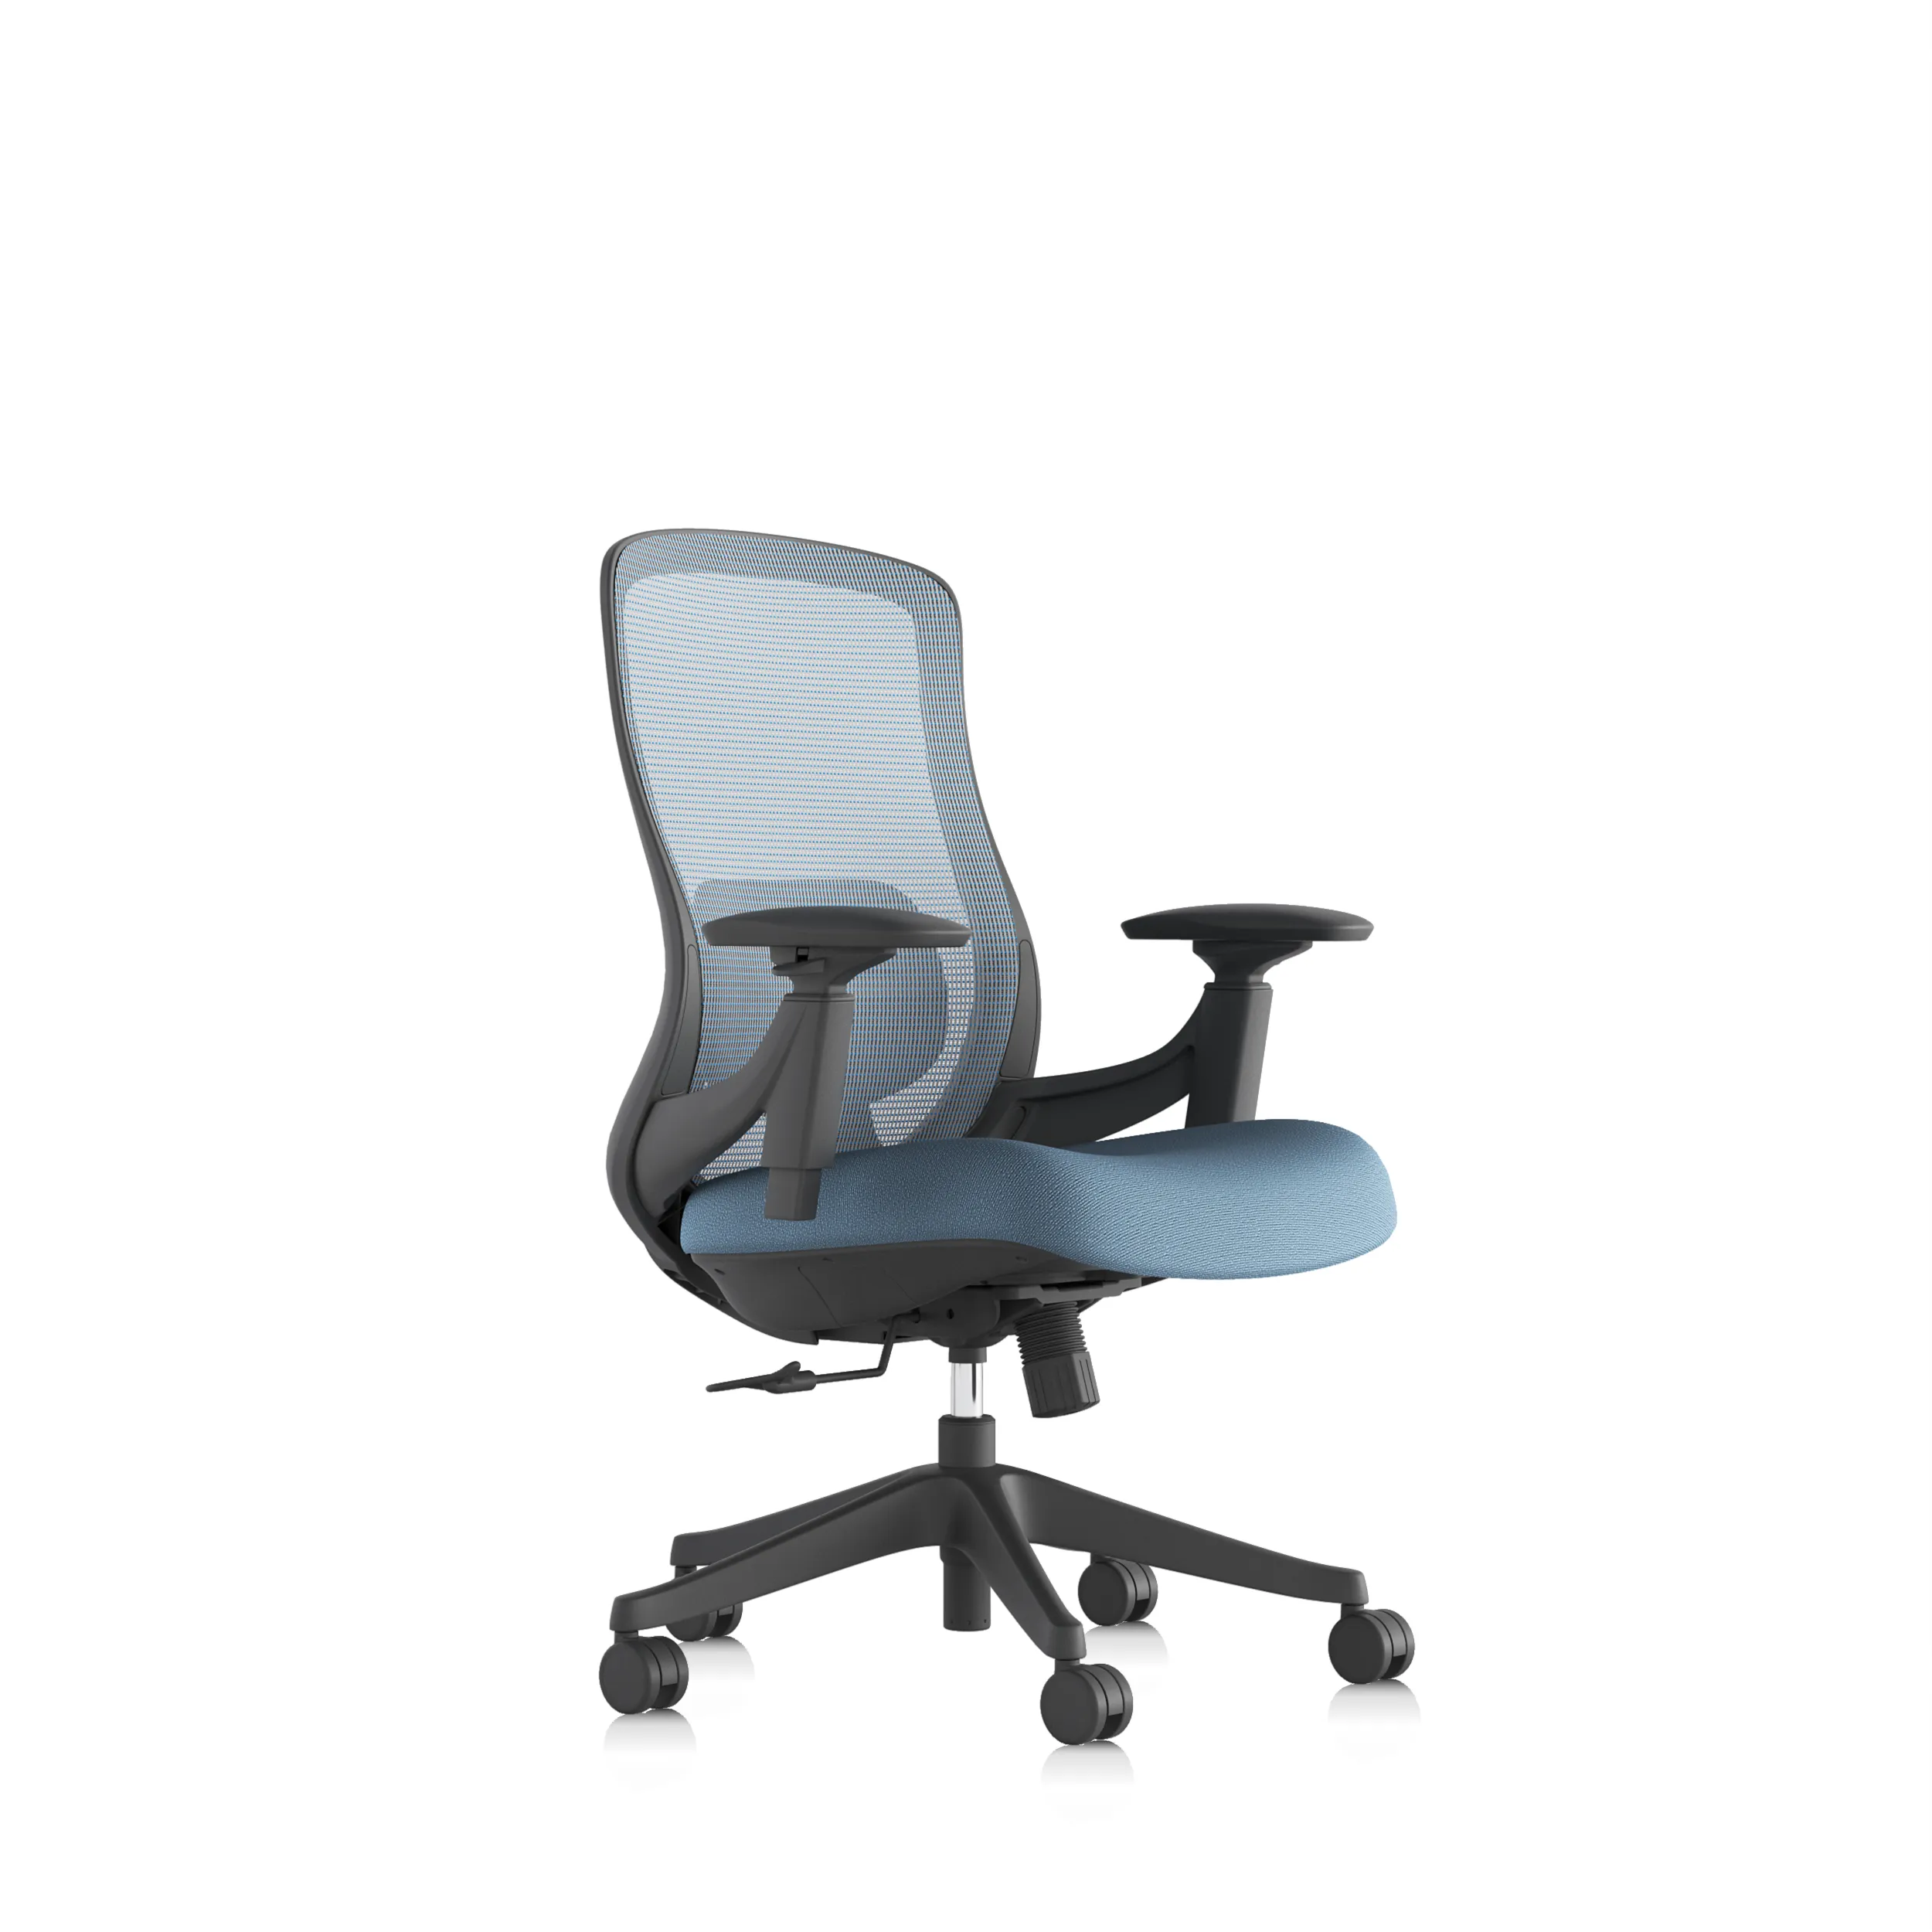 Yige computer adjustable modern office chair ergonomic chair mesh office gaming chair with mid-back